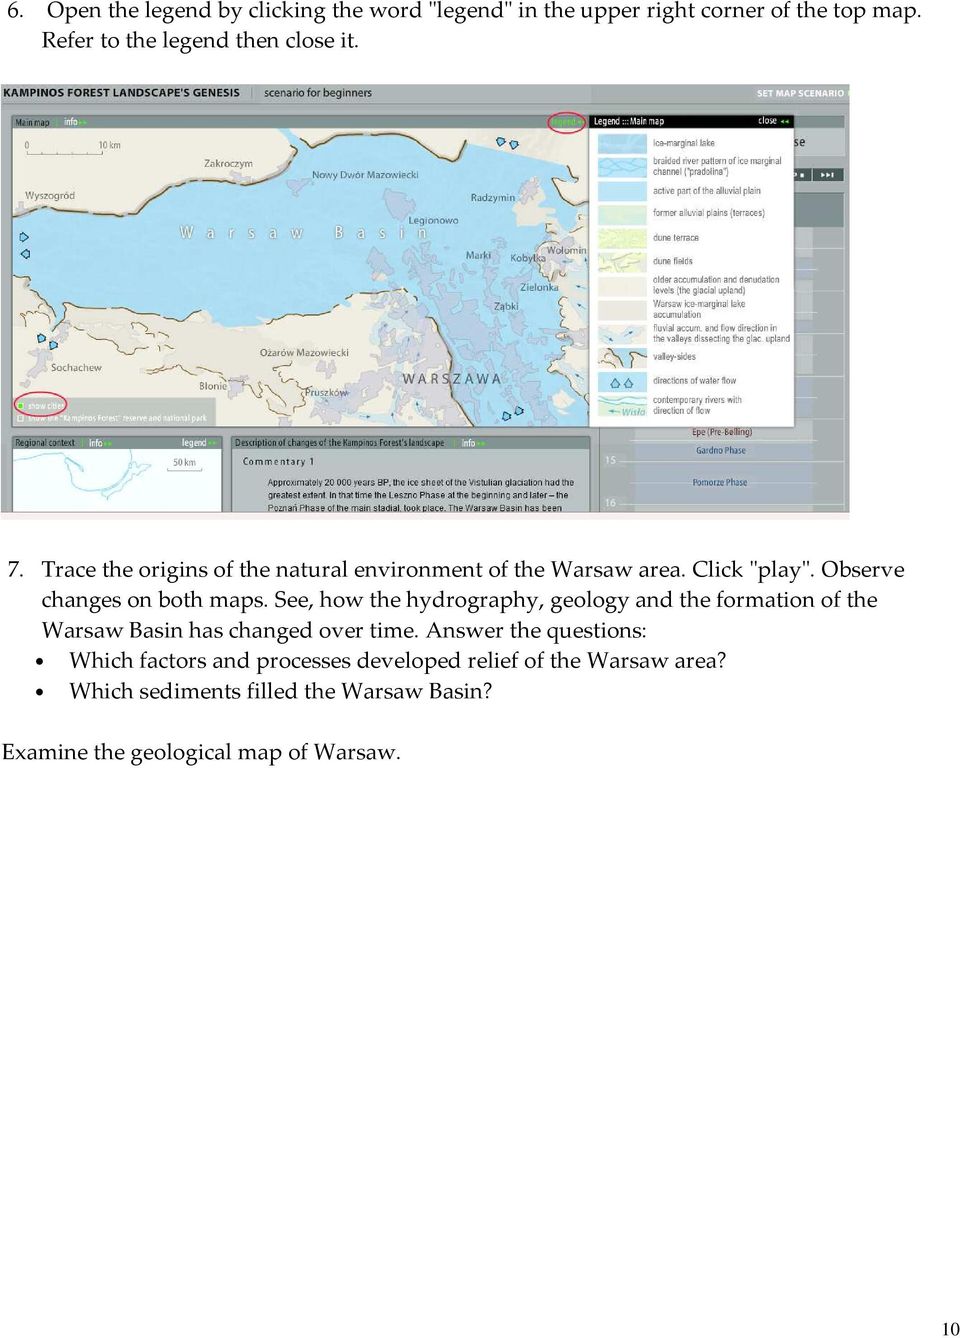 See, how the hydrography, geology and the formation of the Warsaw Basin has changed over time.